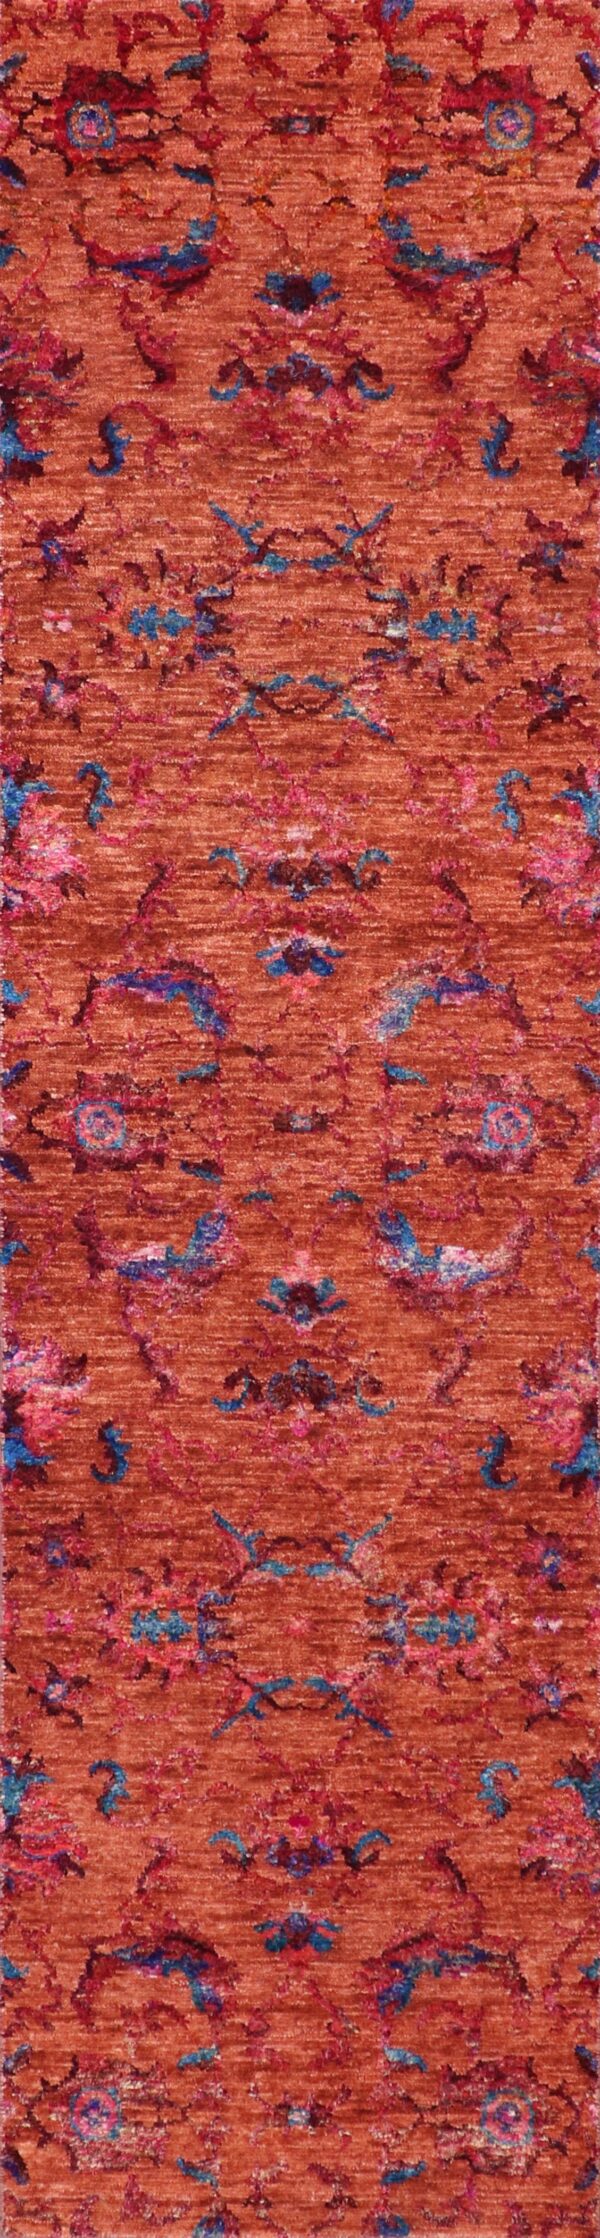 3’x11’10” Contemporary Orange & Blue Wool & Silk Hand-Knotted Rug - Direct Rug Import | Rugs in Chicago, Indiana,South Bend,Granger